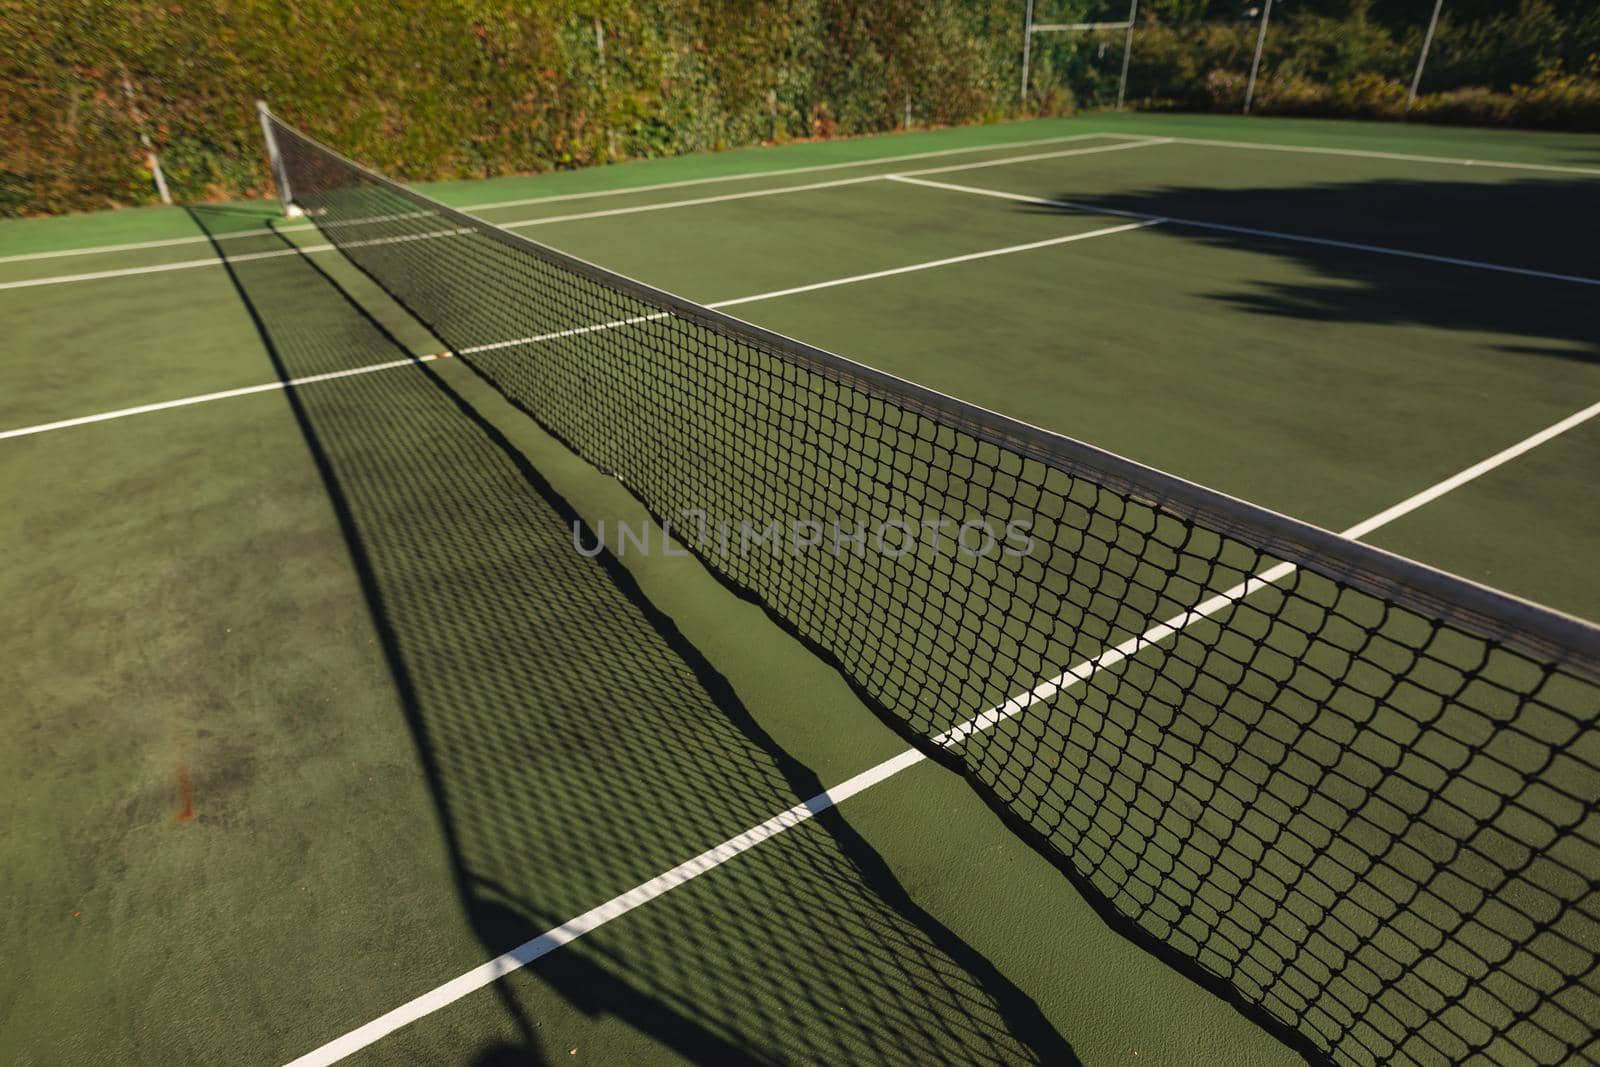 General view of tennis court and tennis net on sunny day by Wavebreakmedia